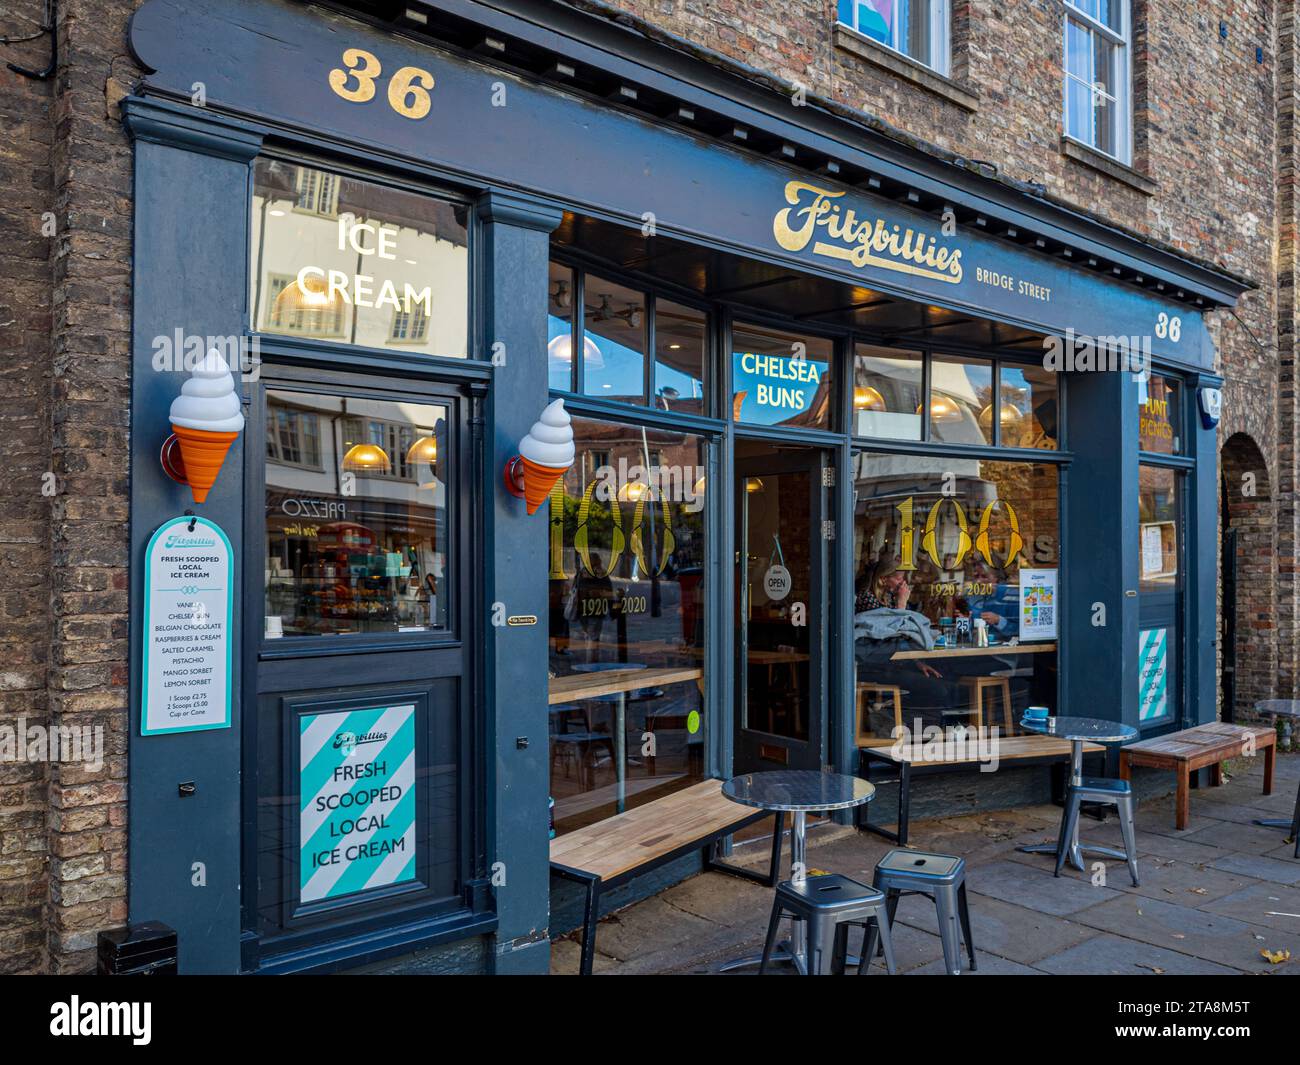 Fitzbillies Cambridge - Fitzbillies Cake Shop and Cafe Bridge Street Cambridge - Fittzbillies is famous for its Sticky Chelsea Buns Stock Photo